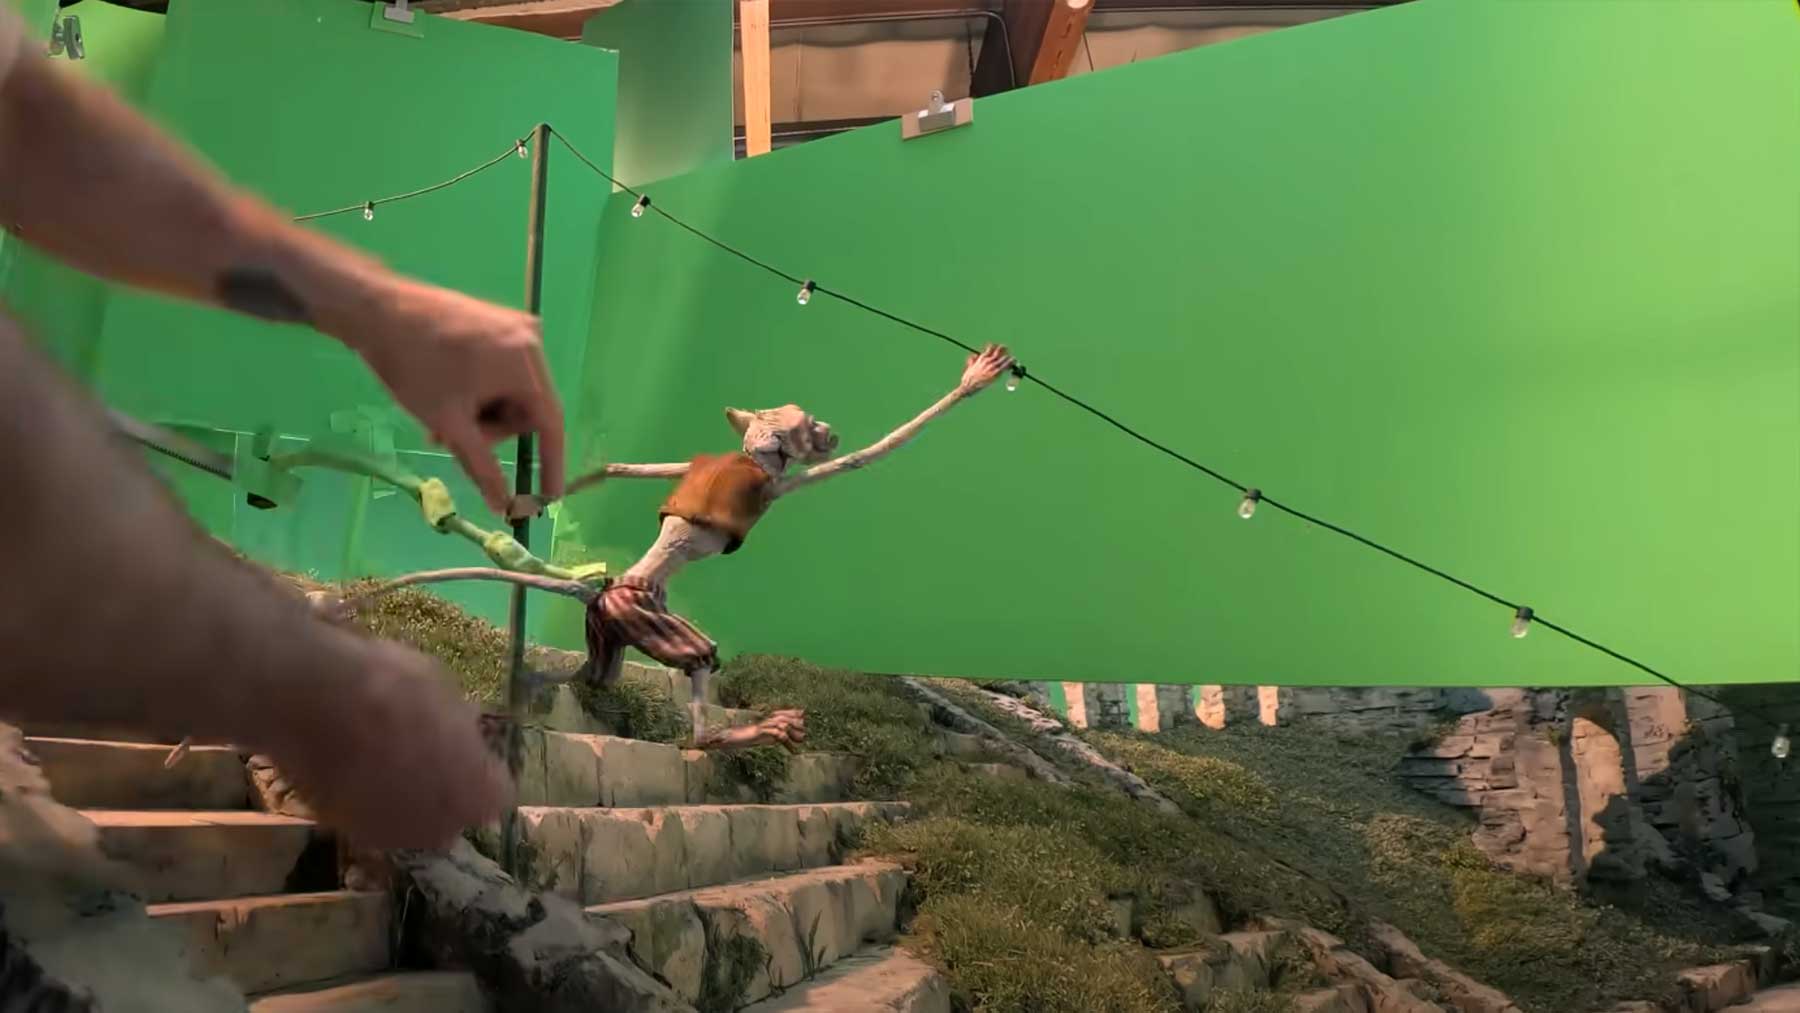 Making of der Stopmotion in "Guillermo del Toros Pinocchio" making-of-Guillermo-del-Toros-Pinocchio-stopmotion 